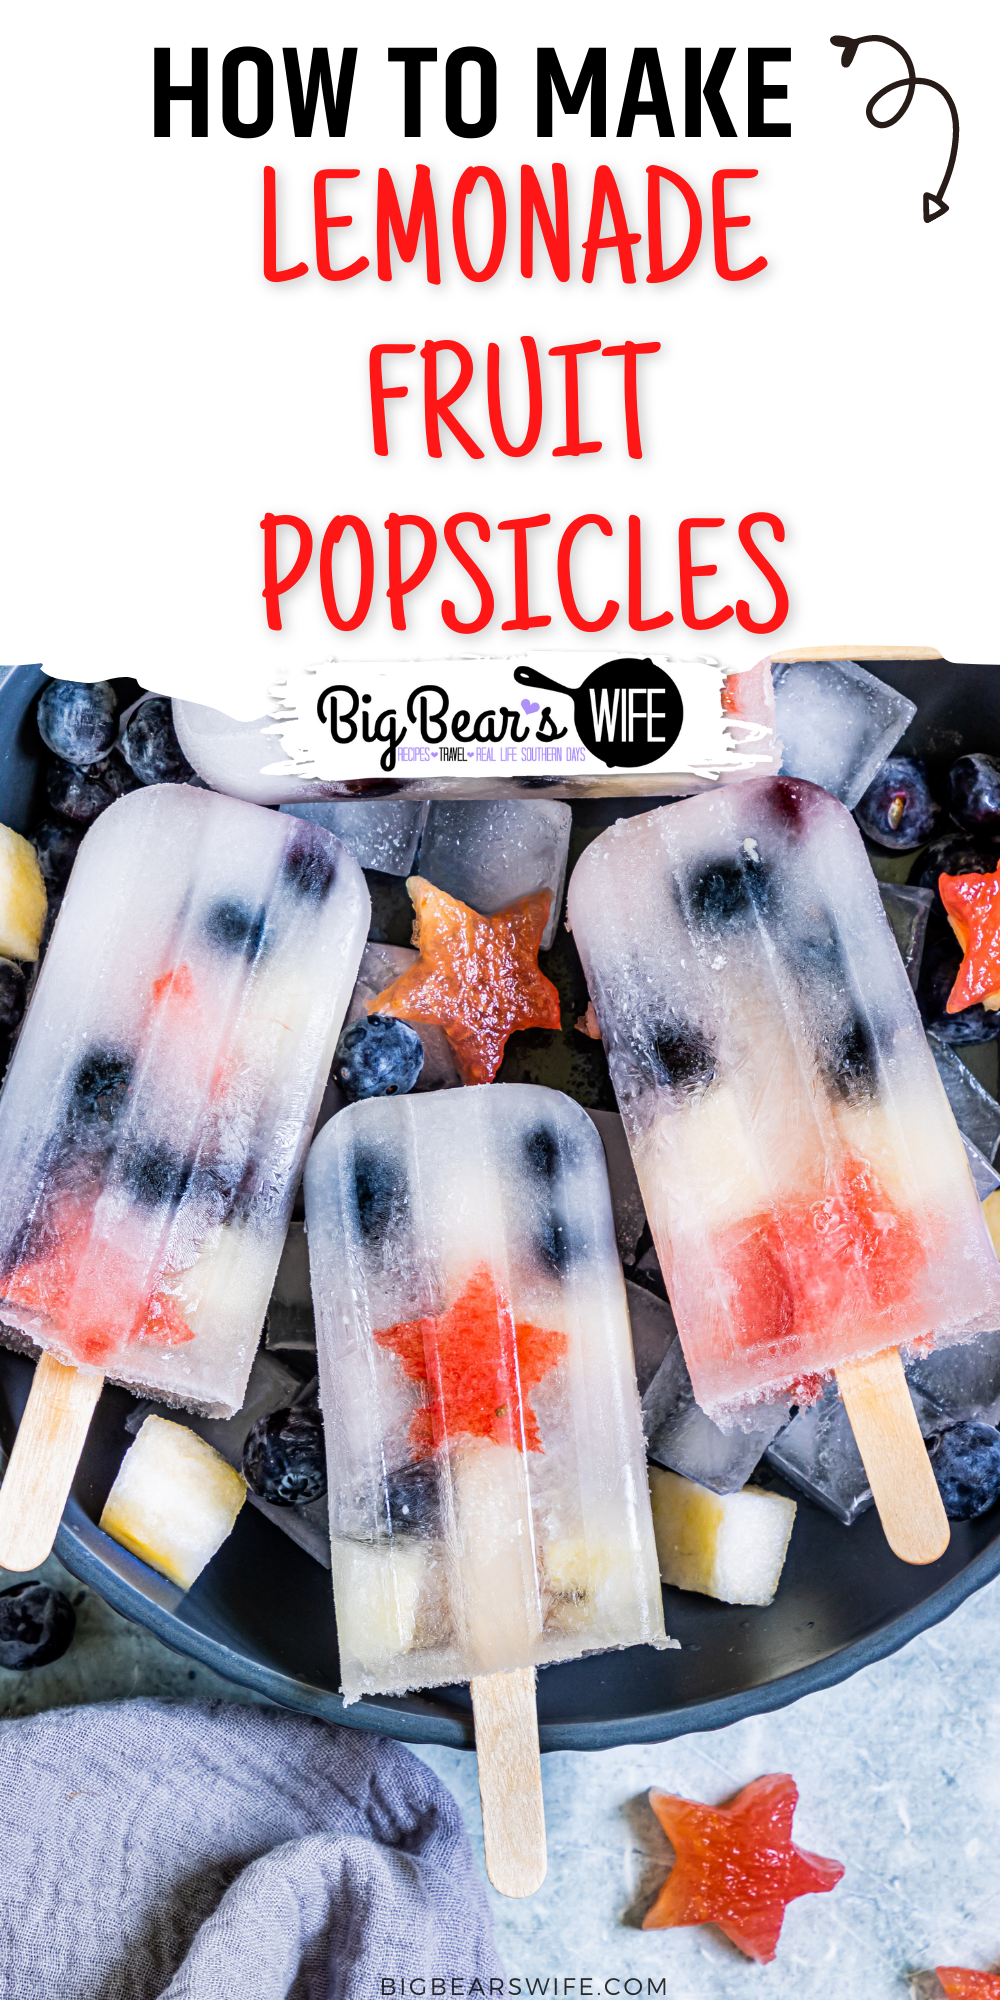 These Lemonade Fruit Popsicles are homemade Fruit Ice Pops that perfect for cooling off on a hot summer day and they're super fun to make with lemonade and whatever fruit you have around the house.  via @bigbearswife